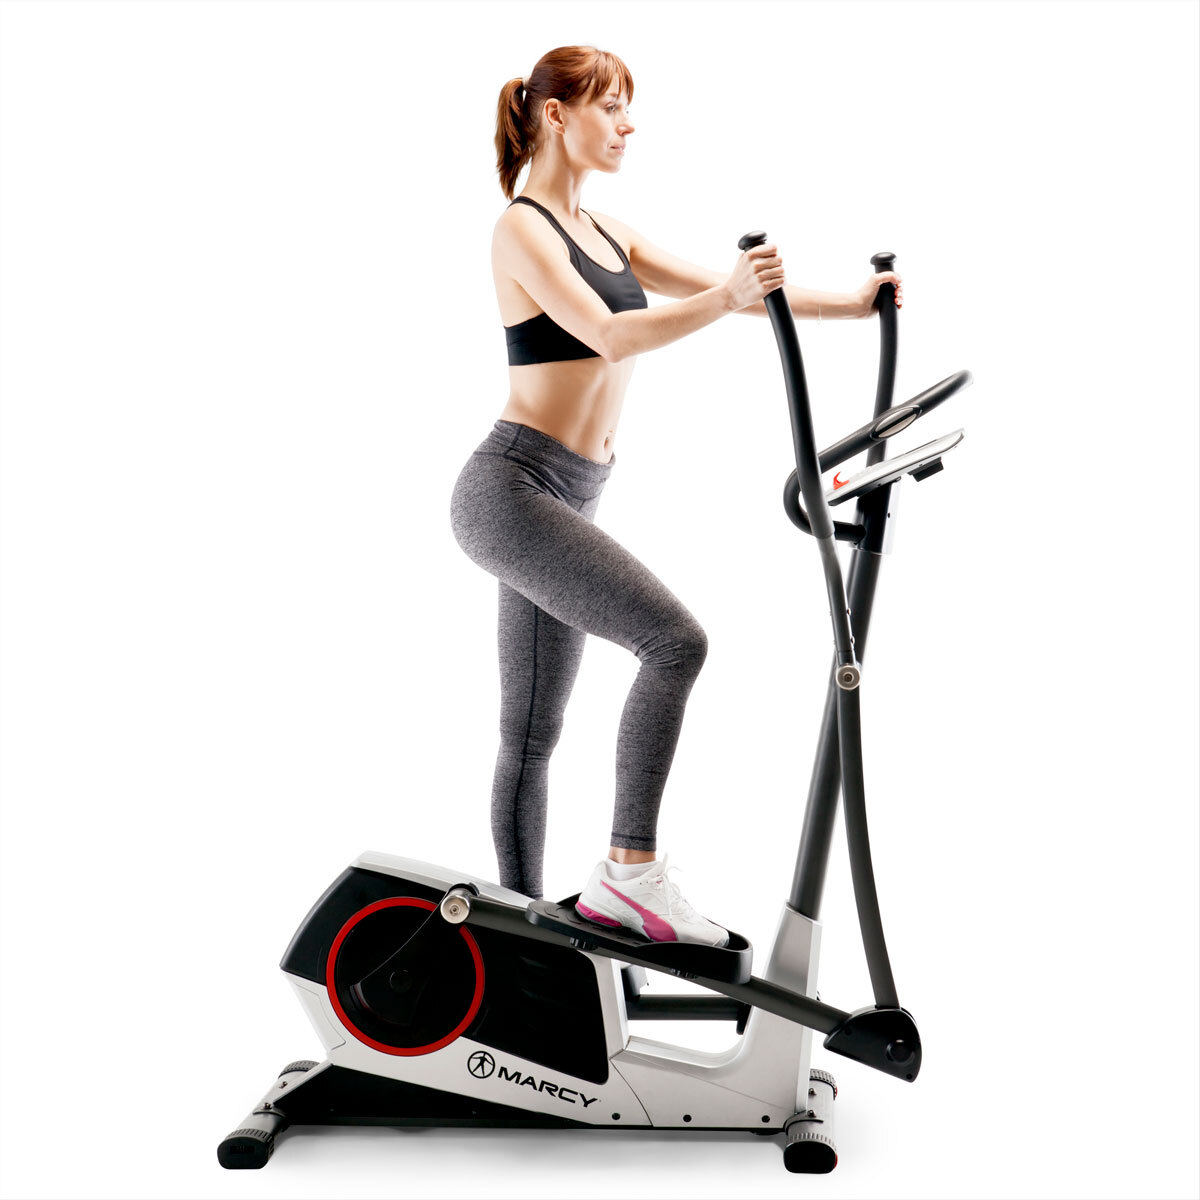 Marcy Magnetic Elliptical Trainer Cardio Workout Machine 